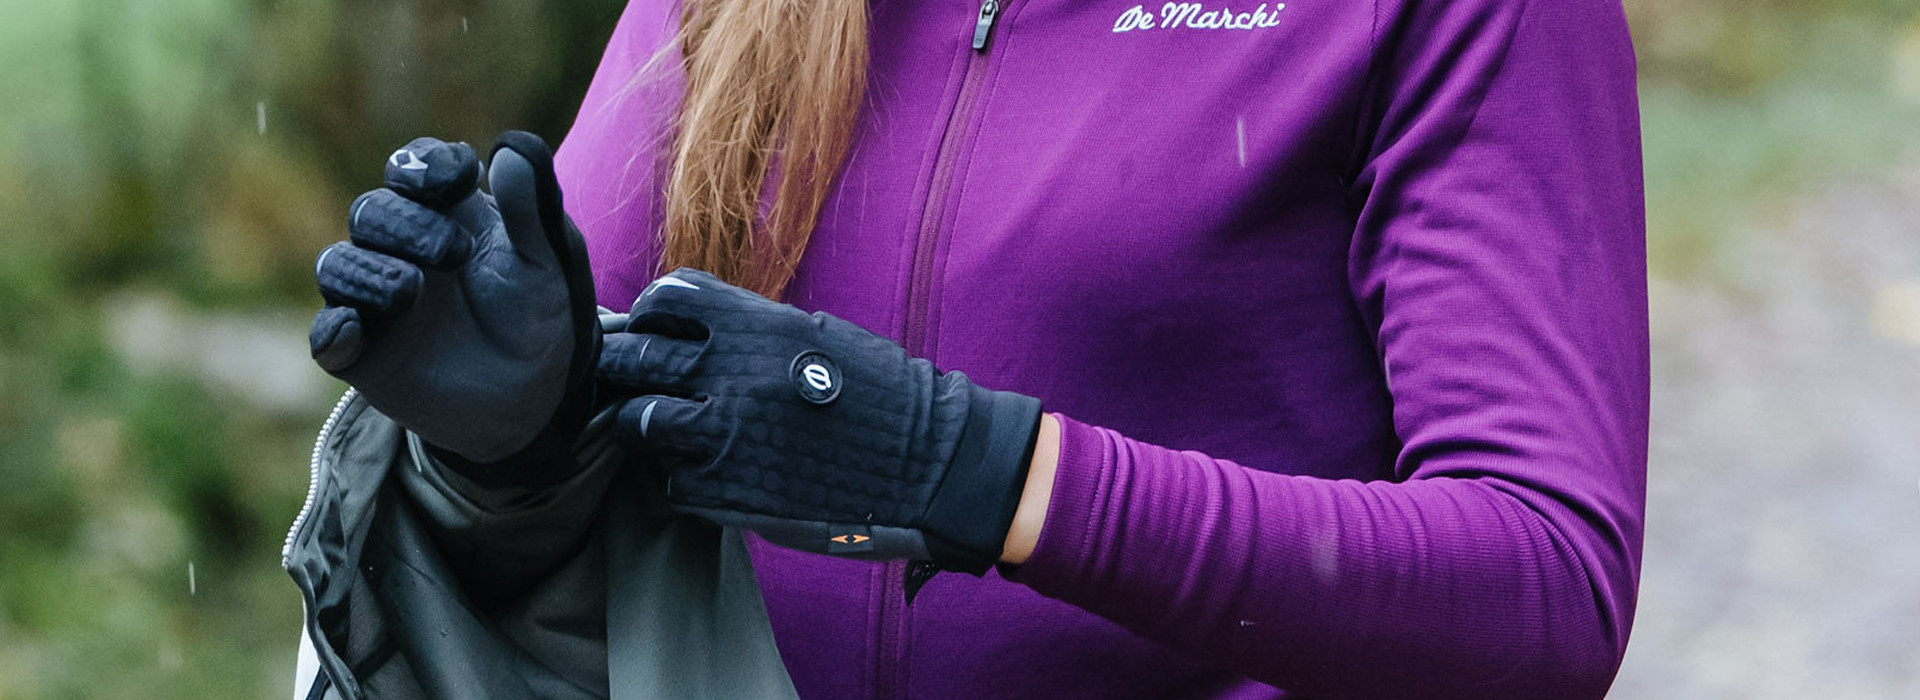 Demarchi - Cycling Gloves